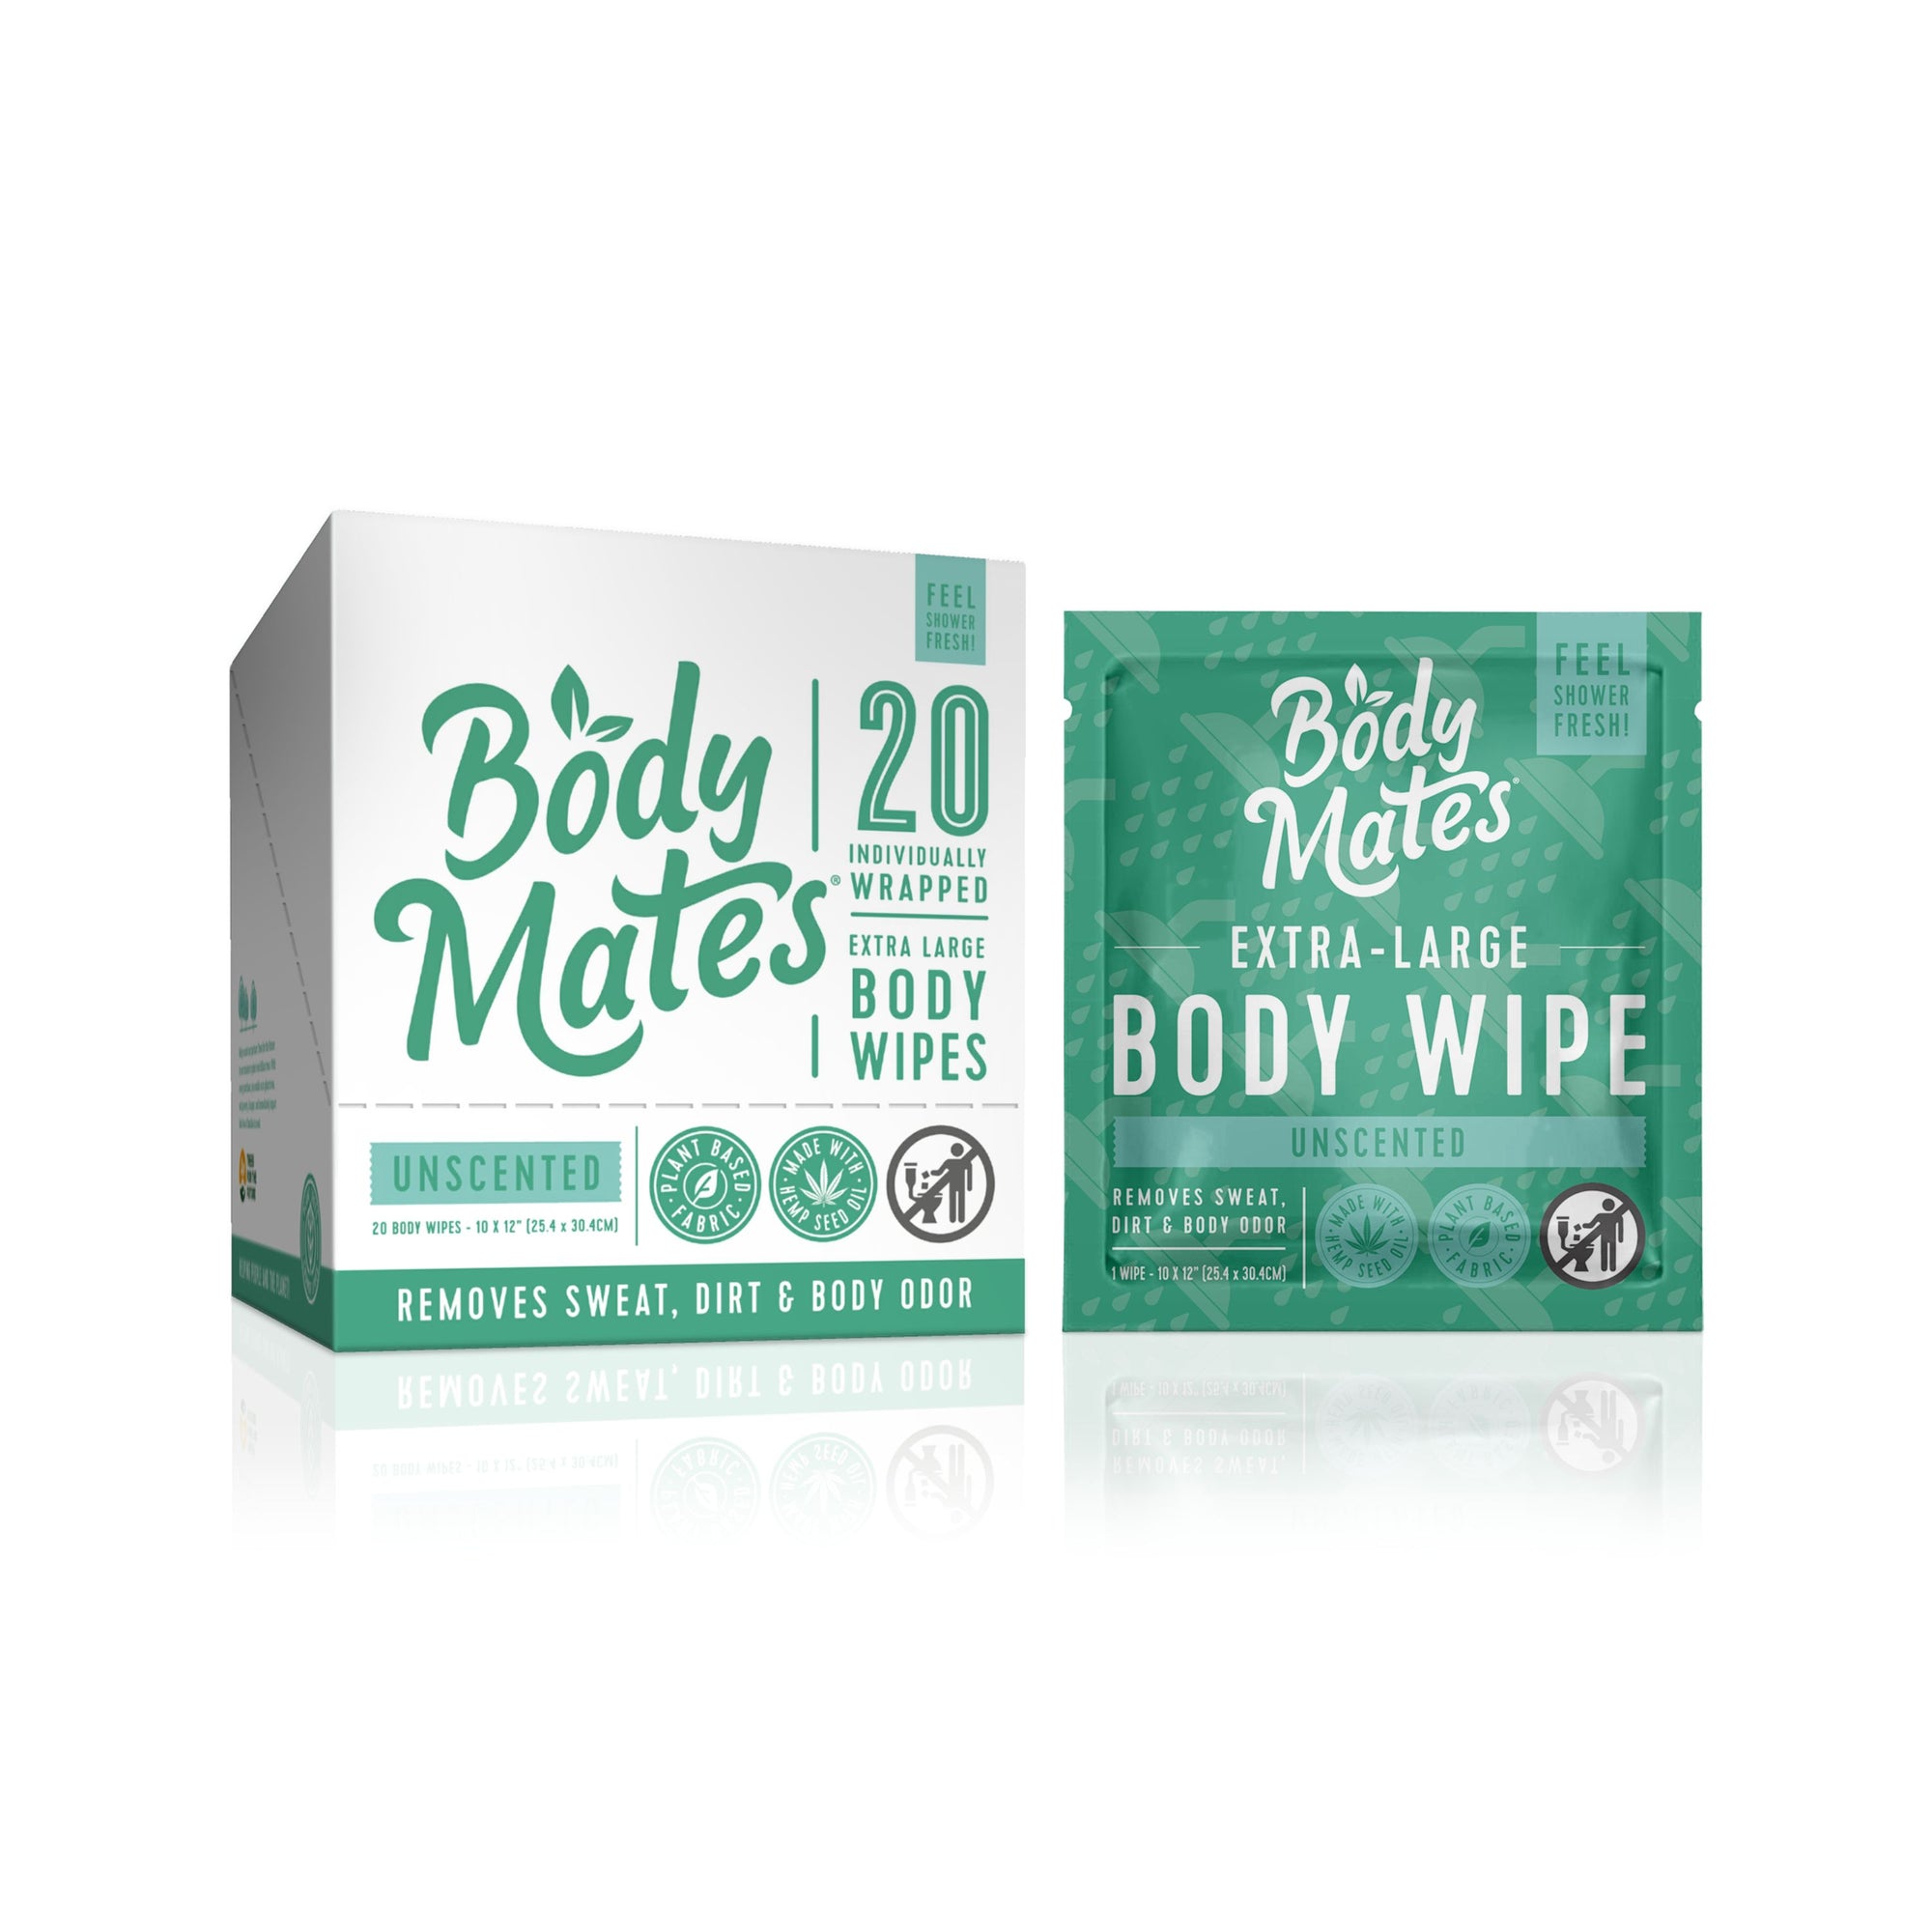 Body Mates: Shower Extra-Large Body Wipes, Portable Travel-Sized Individual Cleansing Wipes, 20 On-the-go Singles (Unscented)